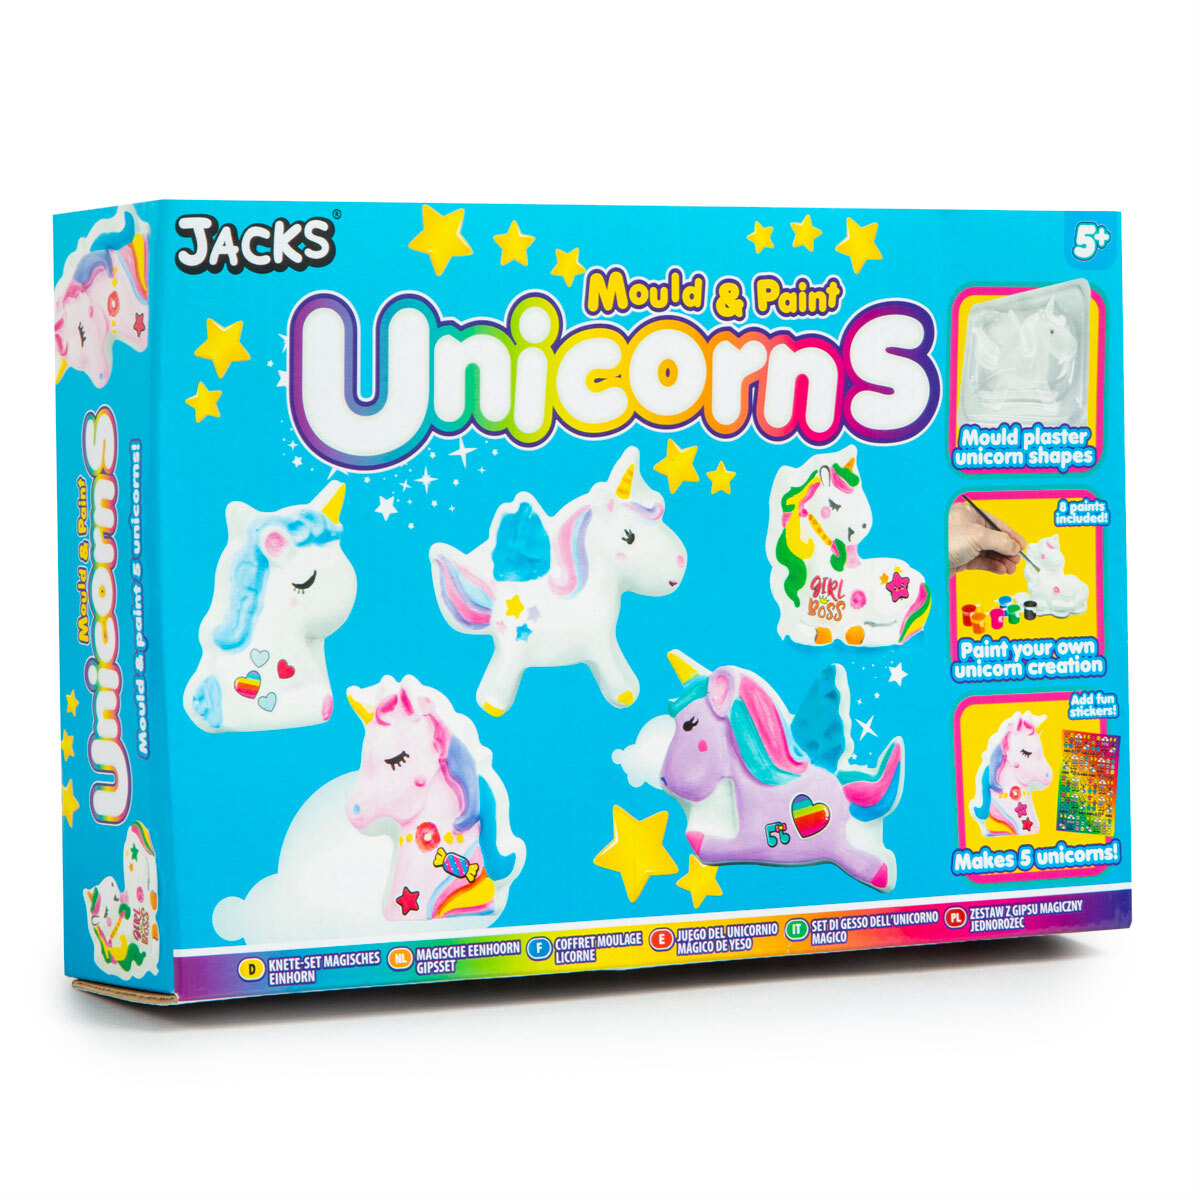  STEM-Accredited Unicorn Painting Kit for Kids - Paint Your Own  Unicorn Craft Kit Toys w 2 Unicorn Headbands, Pegasus, Alicorn & Paint Sets  for Kids Ages 4-8 - Unicorns Gifts for